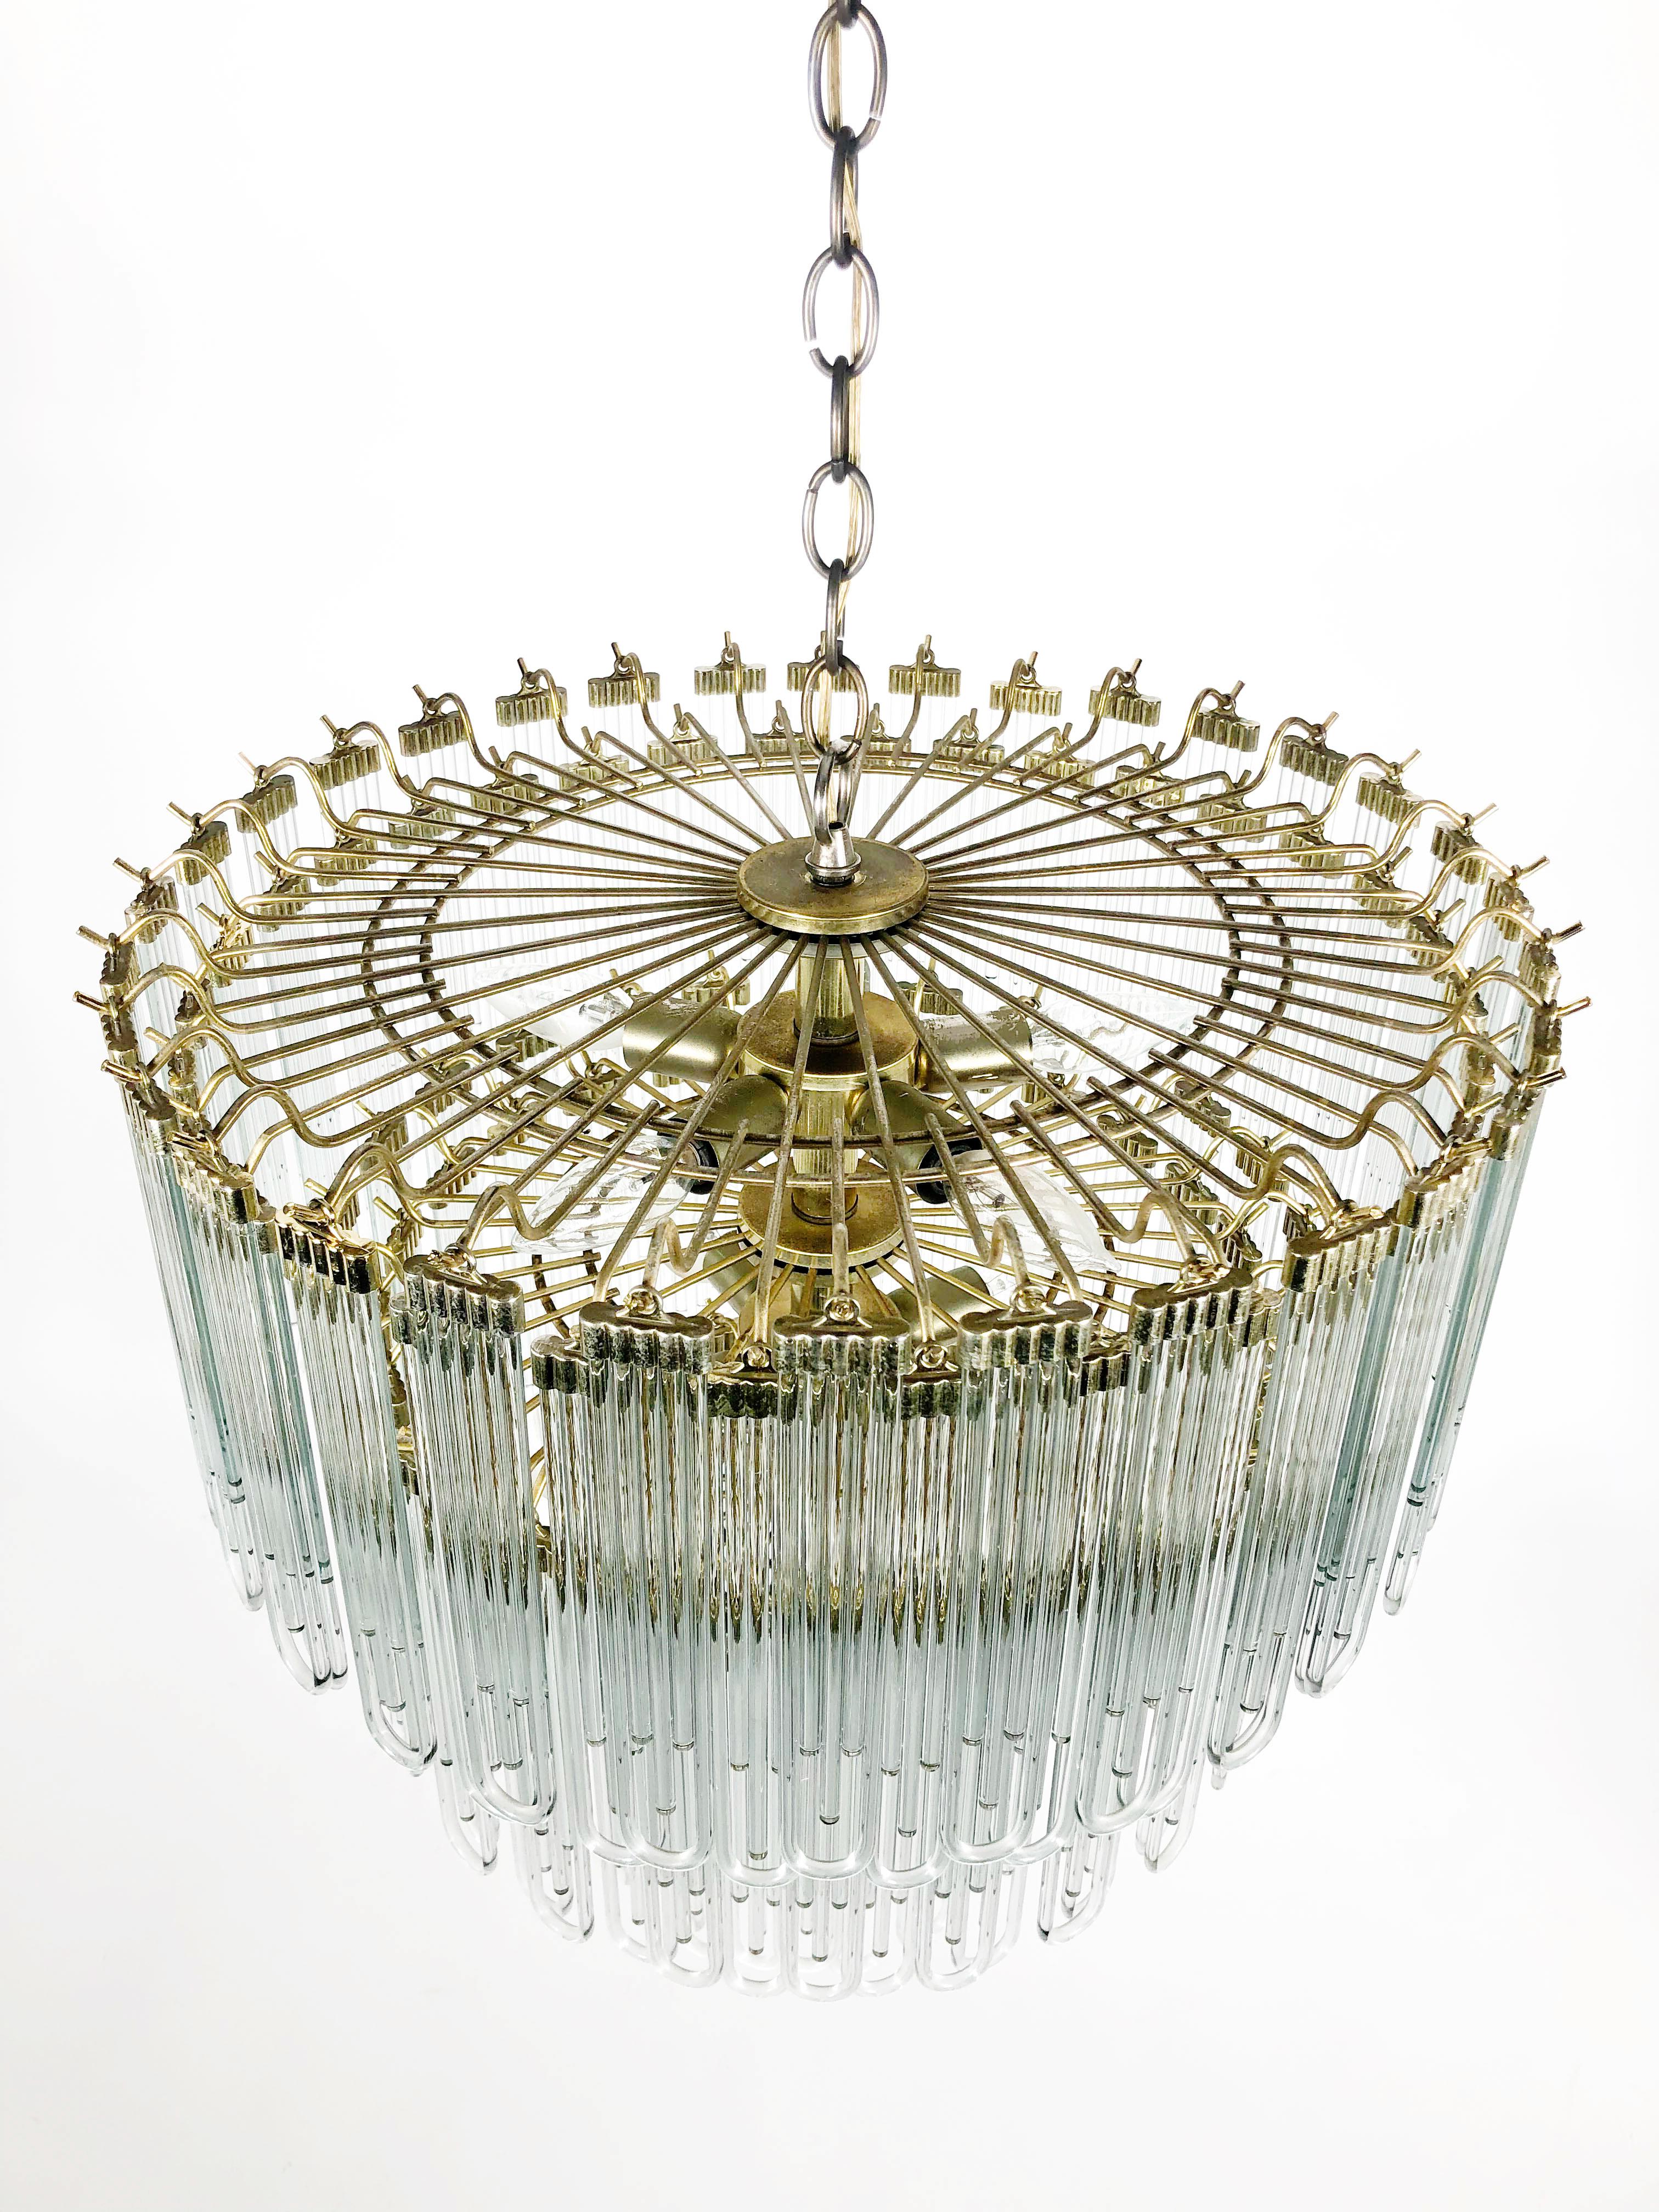 Stunning and unusual Art Deco inspired chandelier. The three tiered chandelier features unique tubular arched glass pendants, a gold plated frame and 10 candelabra sockets: 5 at the top, 4 in the middle and 1 center down light.
A box of